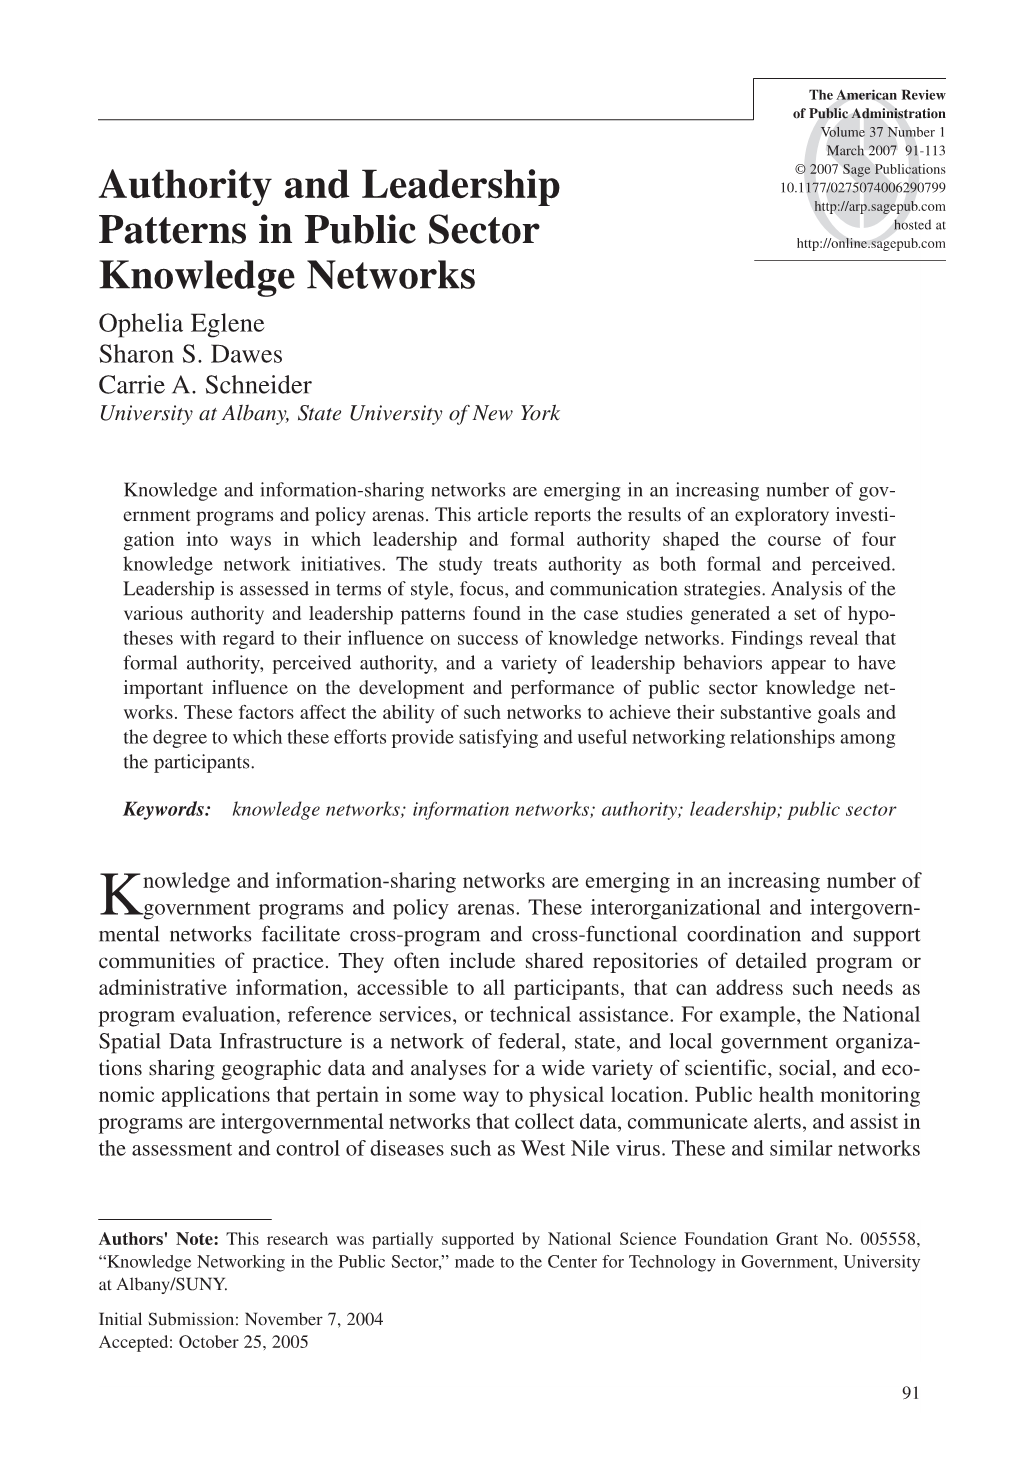 Authority and Leadership Patterns in Public Sector Knowledge Networks